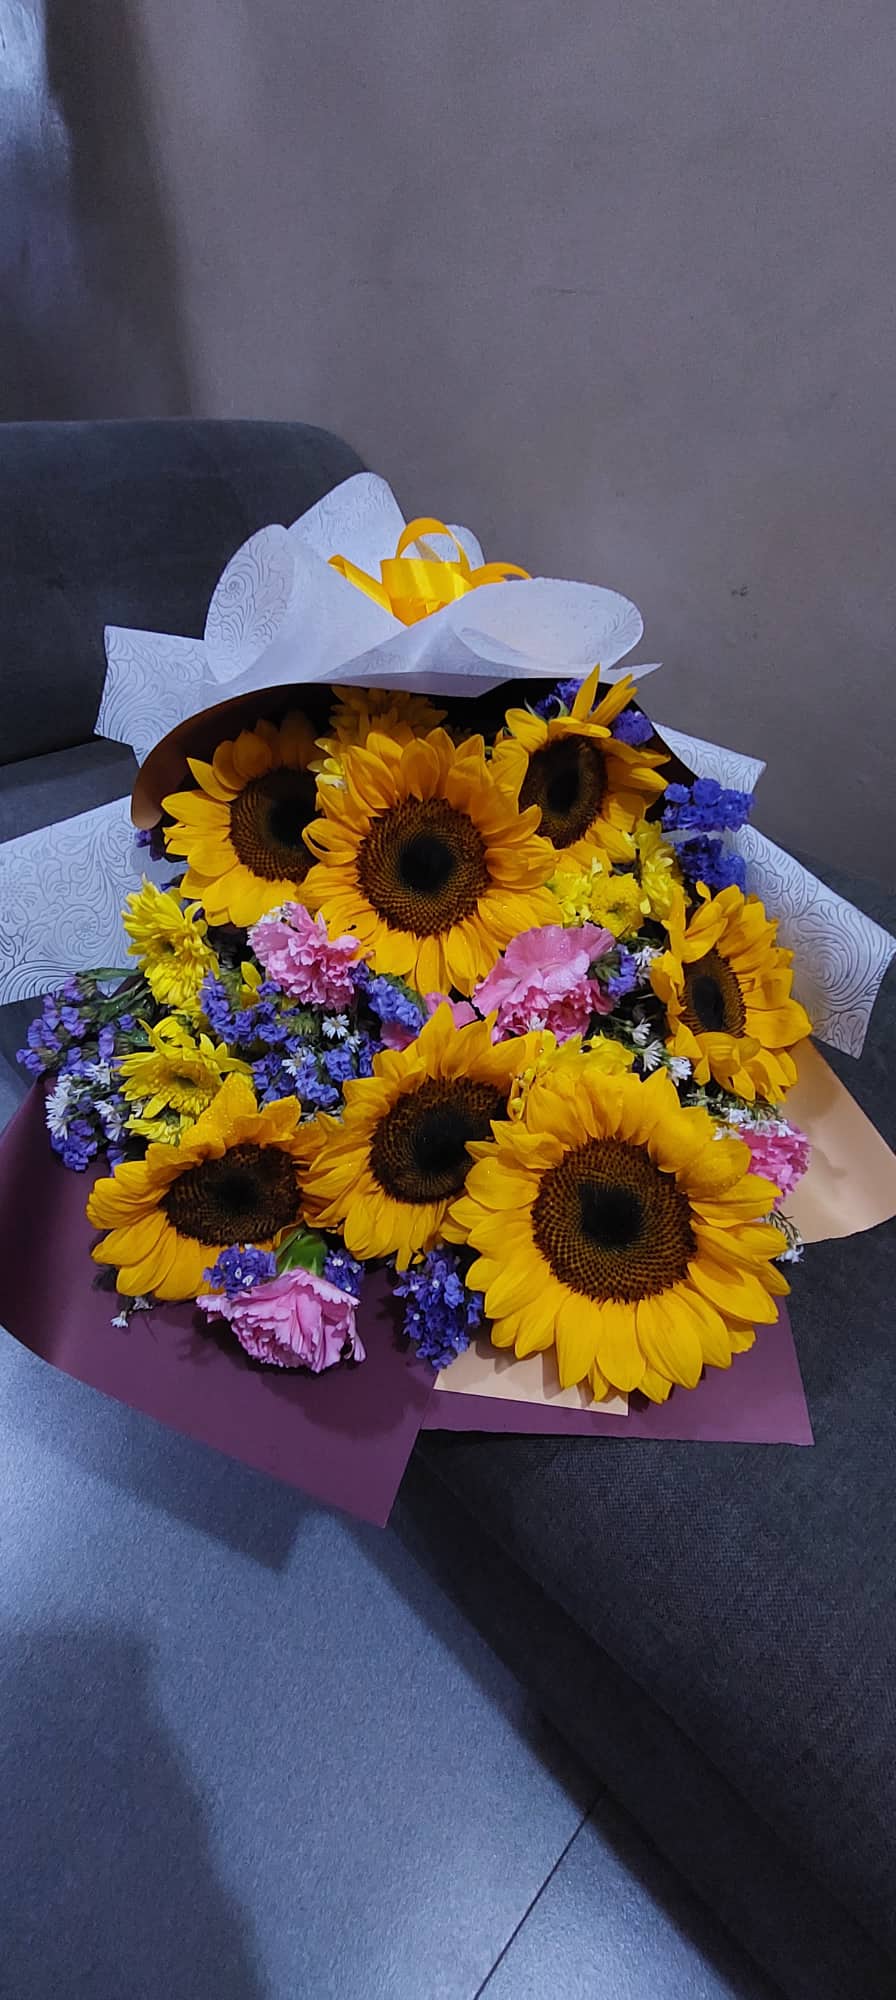 sunflowers and carnations bouquet